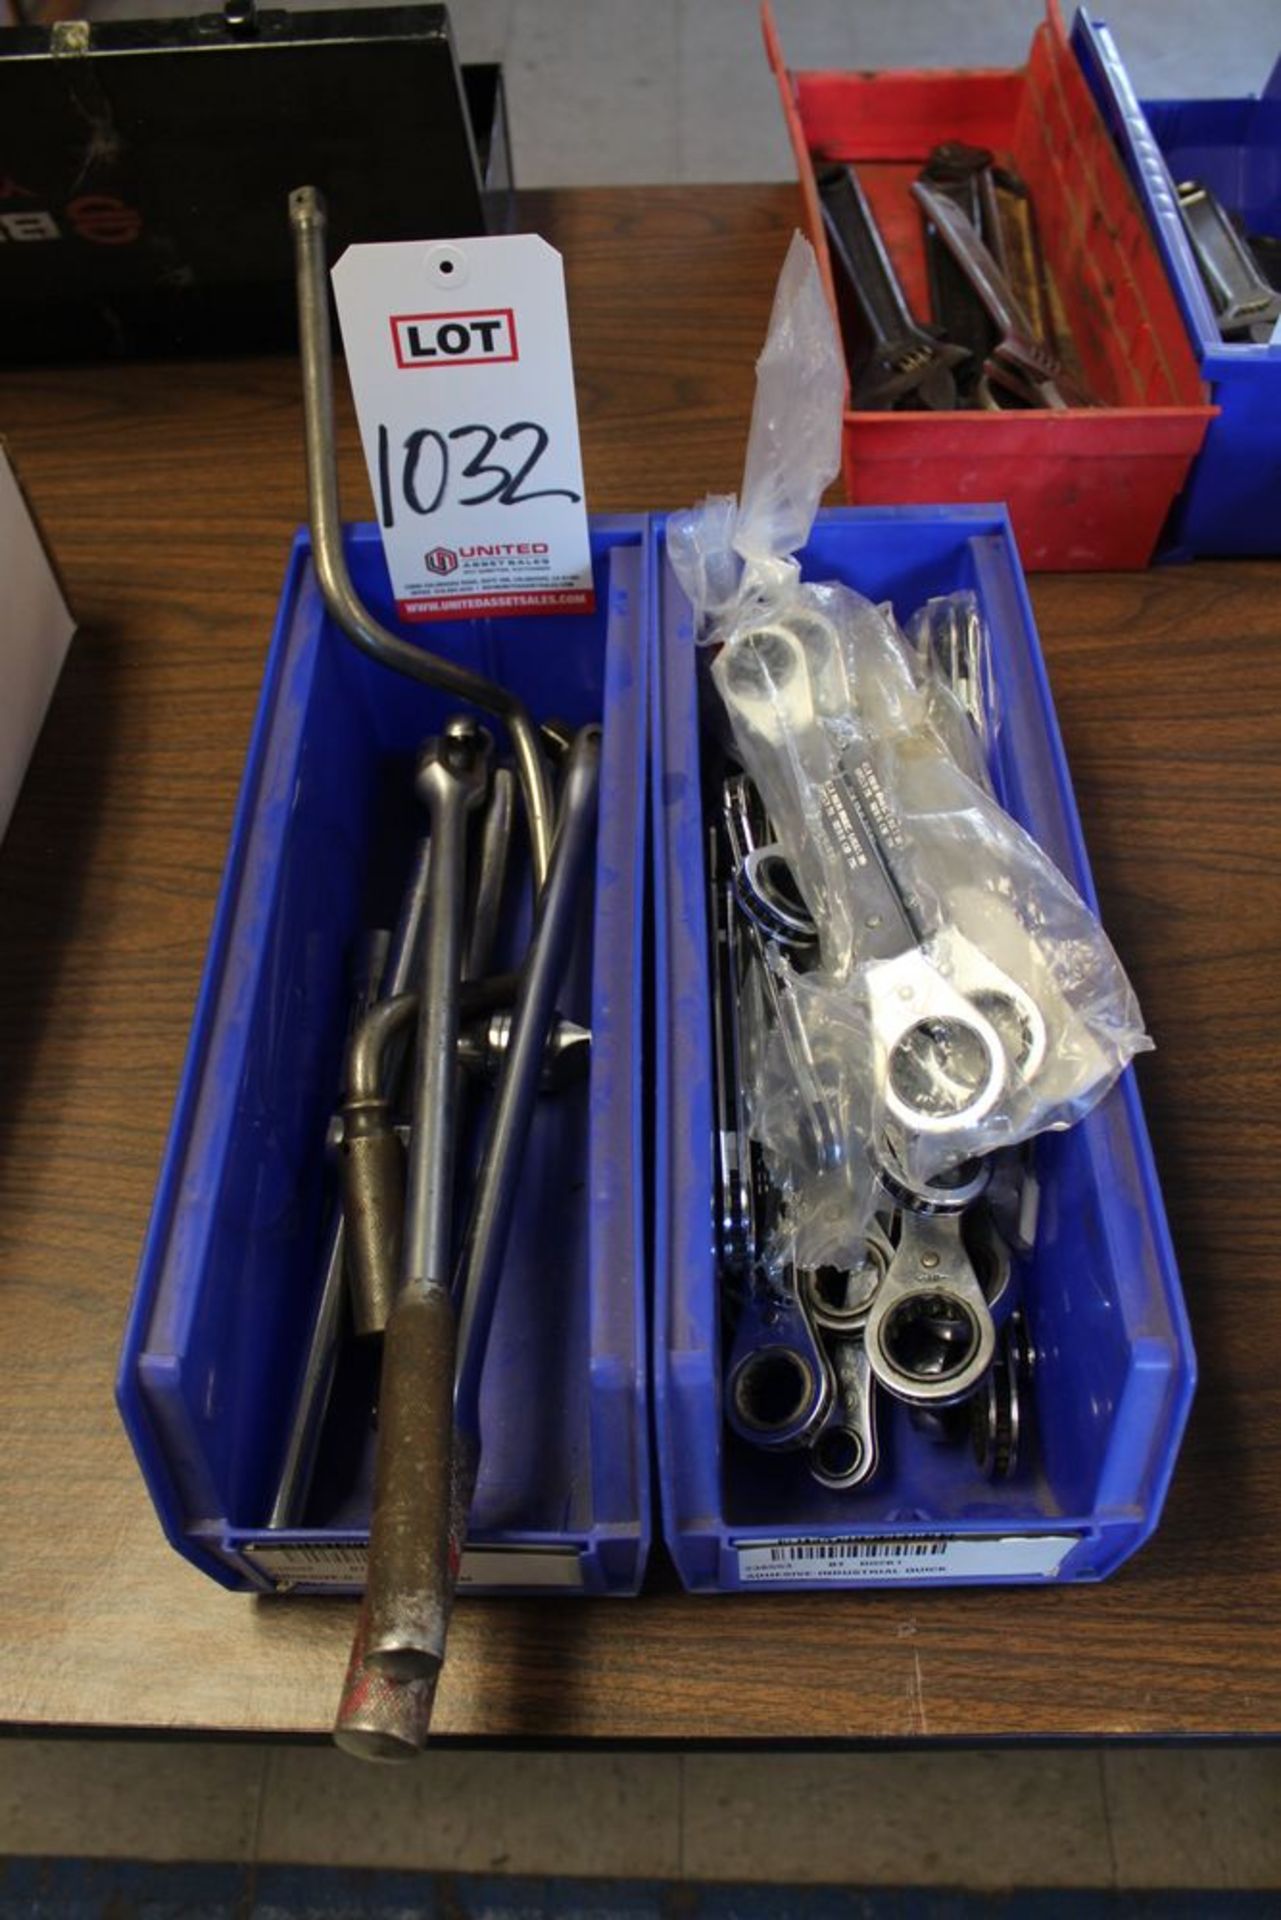 LOT - SOCKET WRENCHES & RATCHET WRENCHES, (LUNCHROOM)